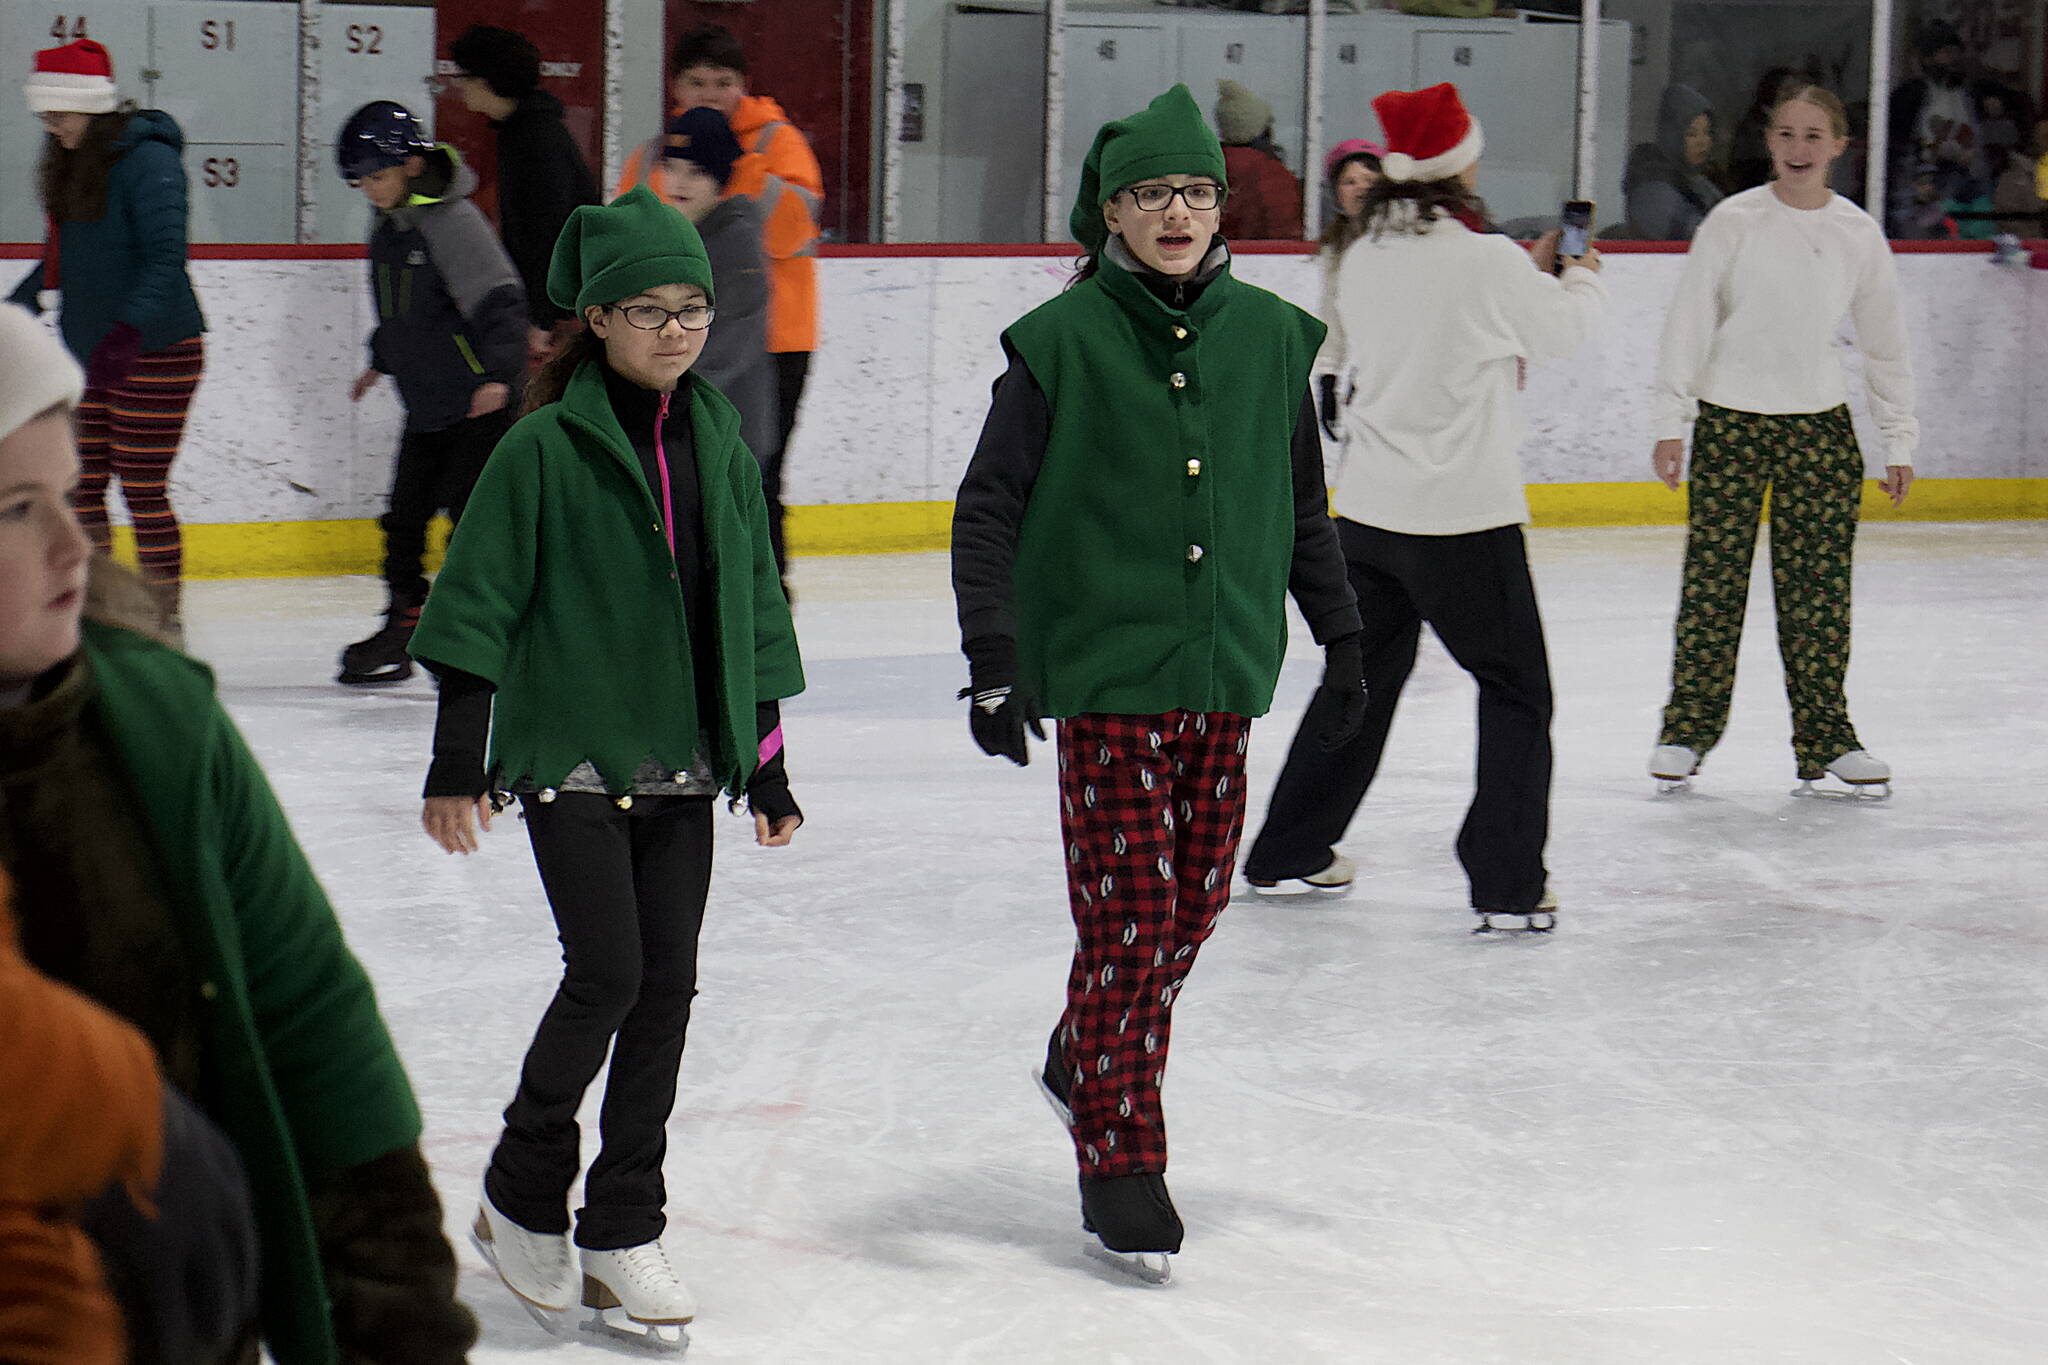 A pair of Santa’s elves get into the spirit of the season during the annual Santa Skate at Treadwell Arena on Friday night. (Mark Sabbatini / Juneau Empire)